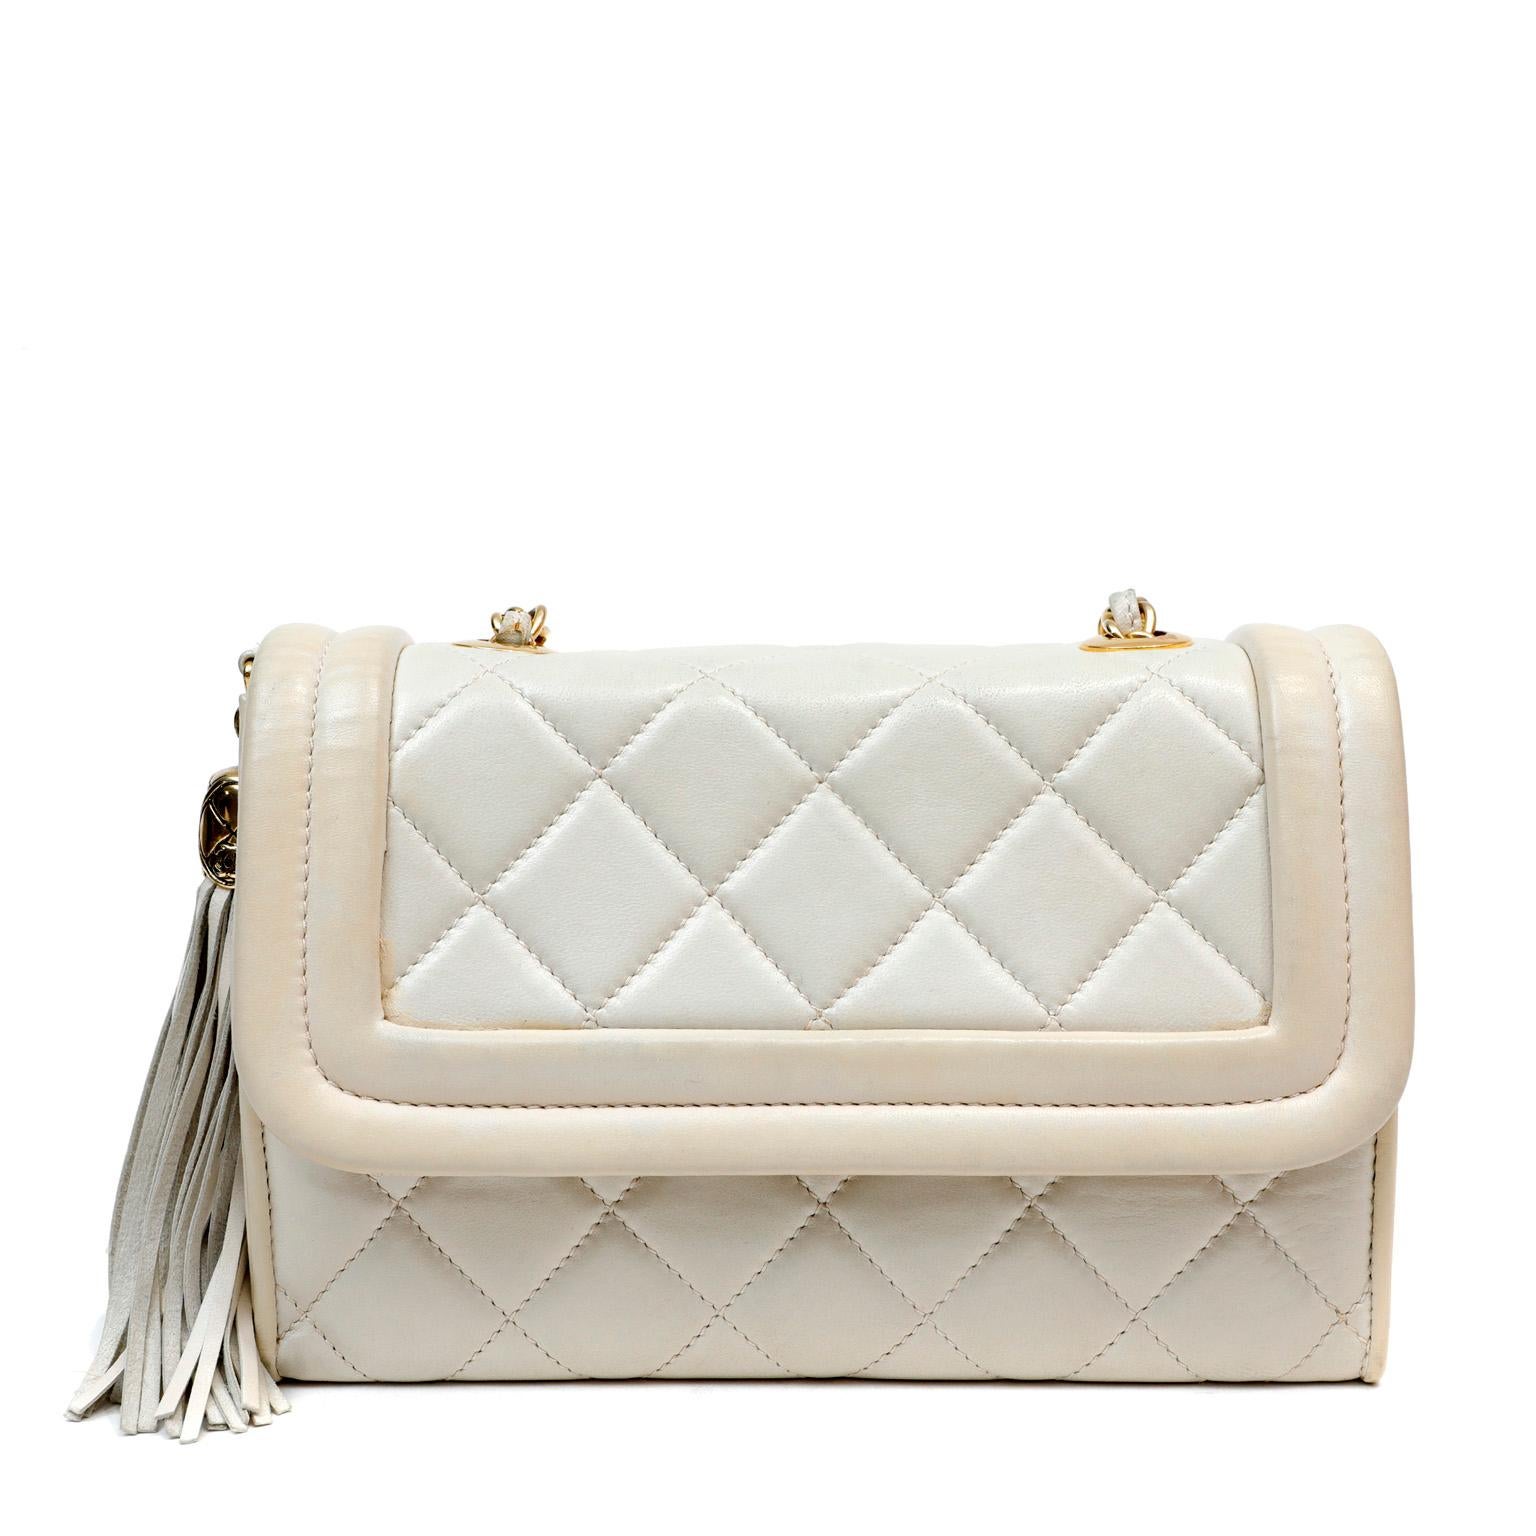 Chanel Ivory Quilted Lambskin Vintage Flap Bag In Good Condition For Sale In Palm Beach, FL